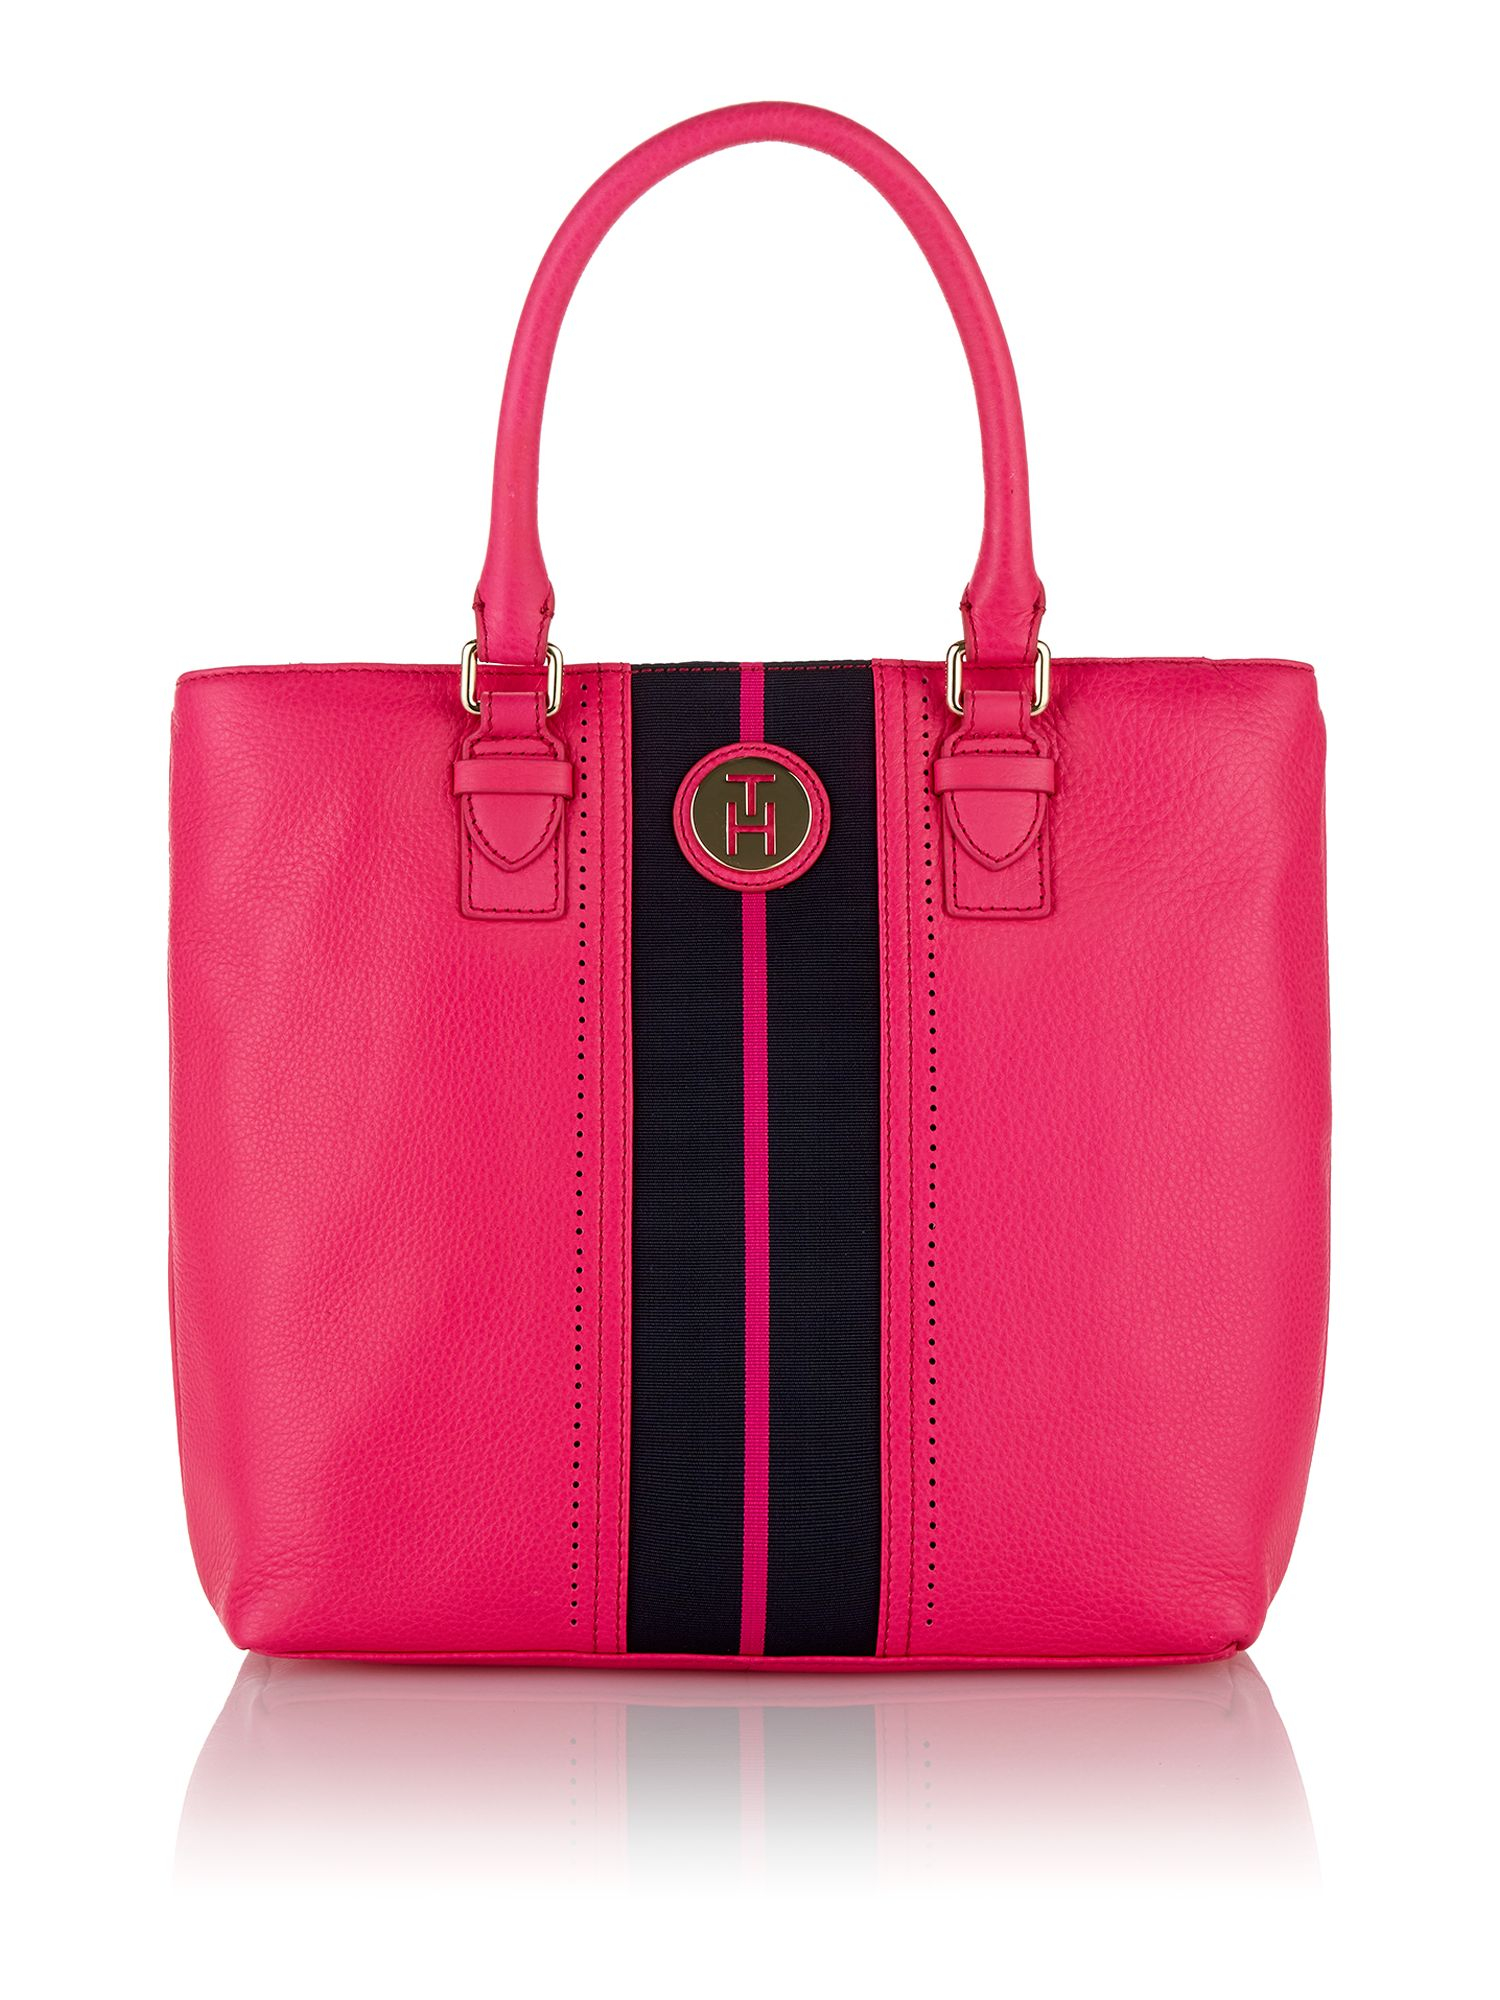 Tommy hilfiger Pink Tote Bag in Pink | Lyst